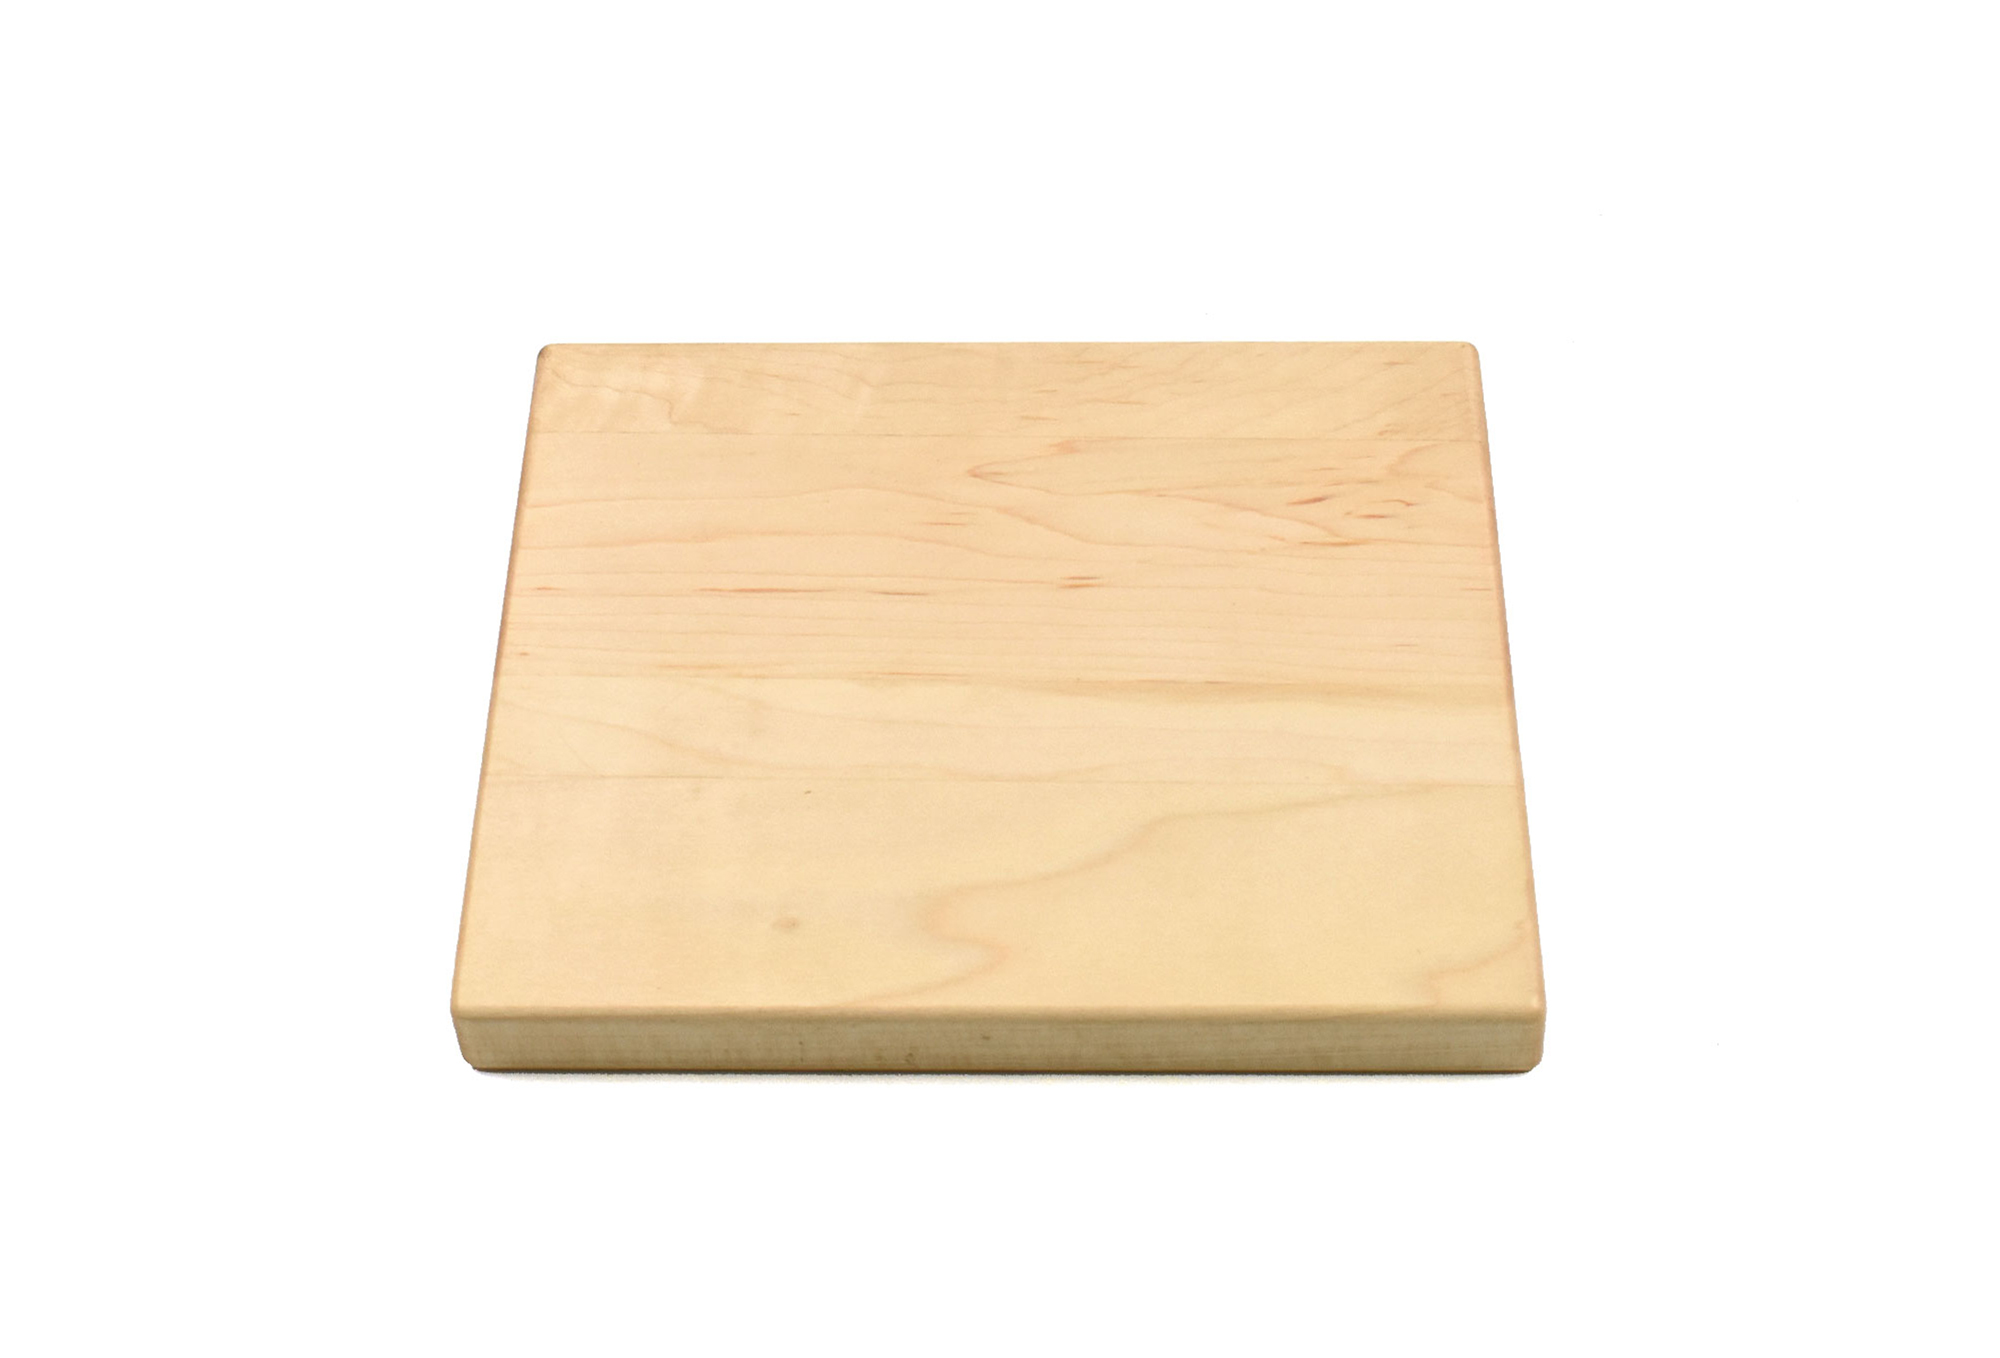 Mini board with rounded corners & edges